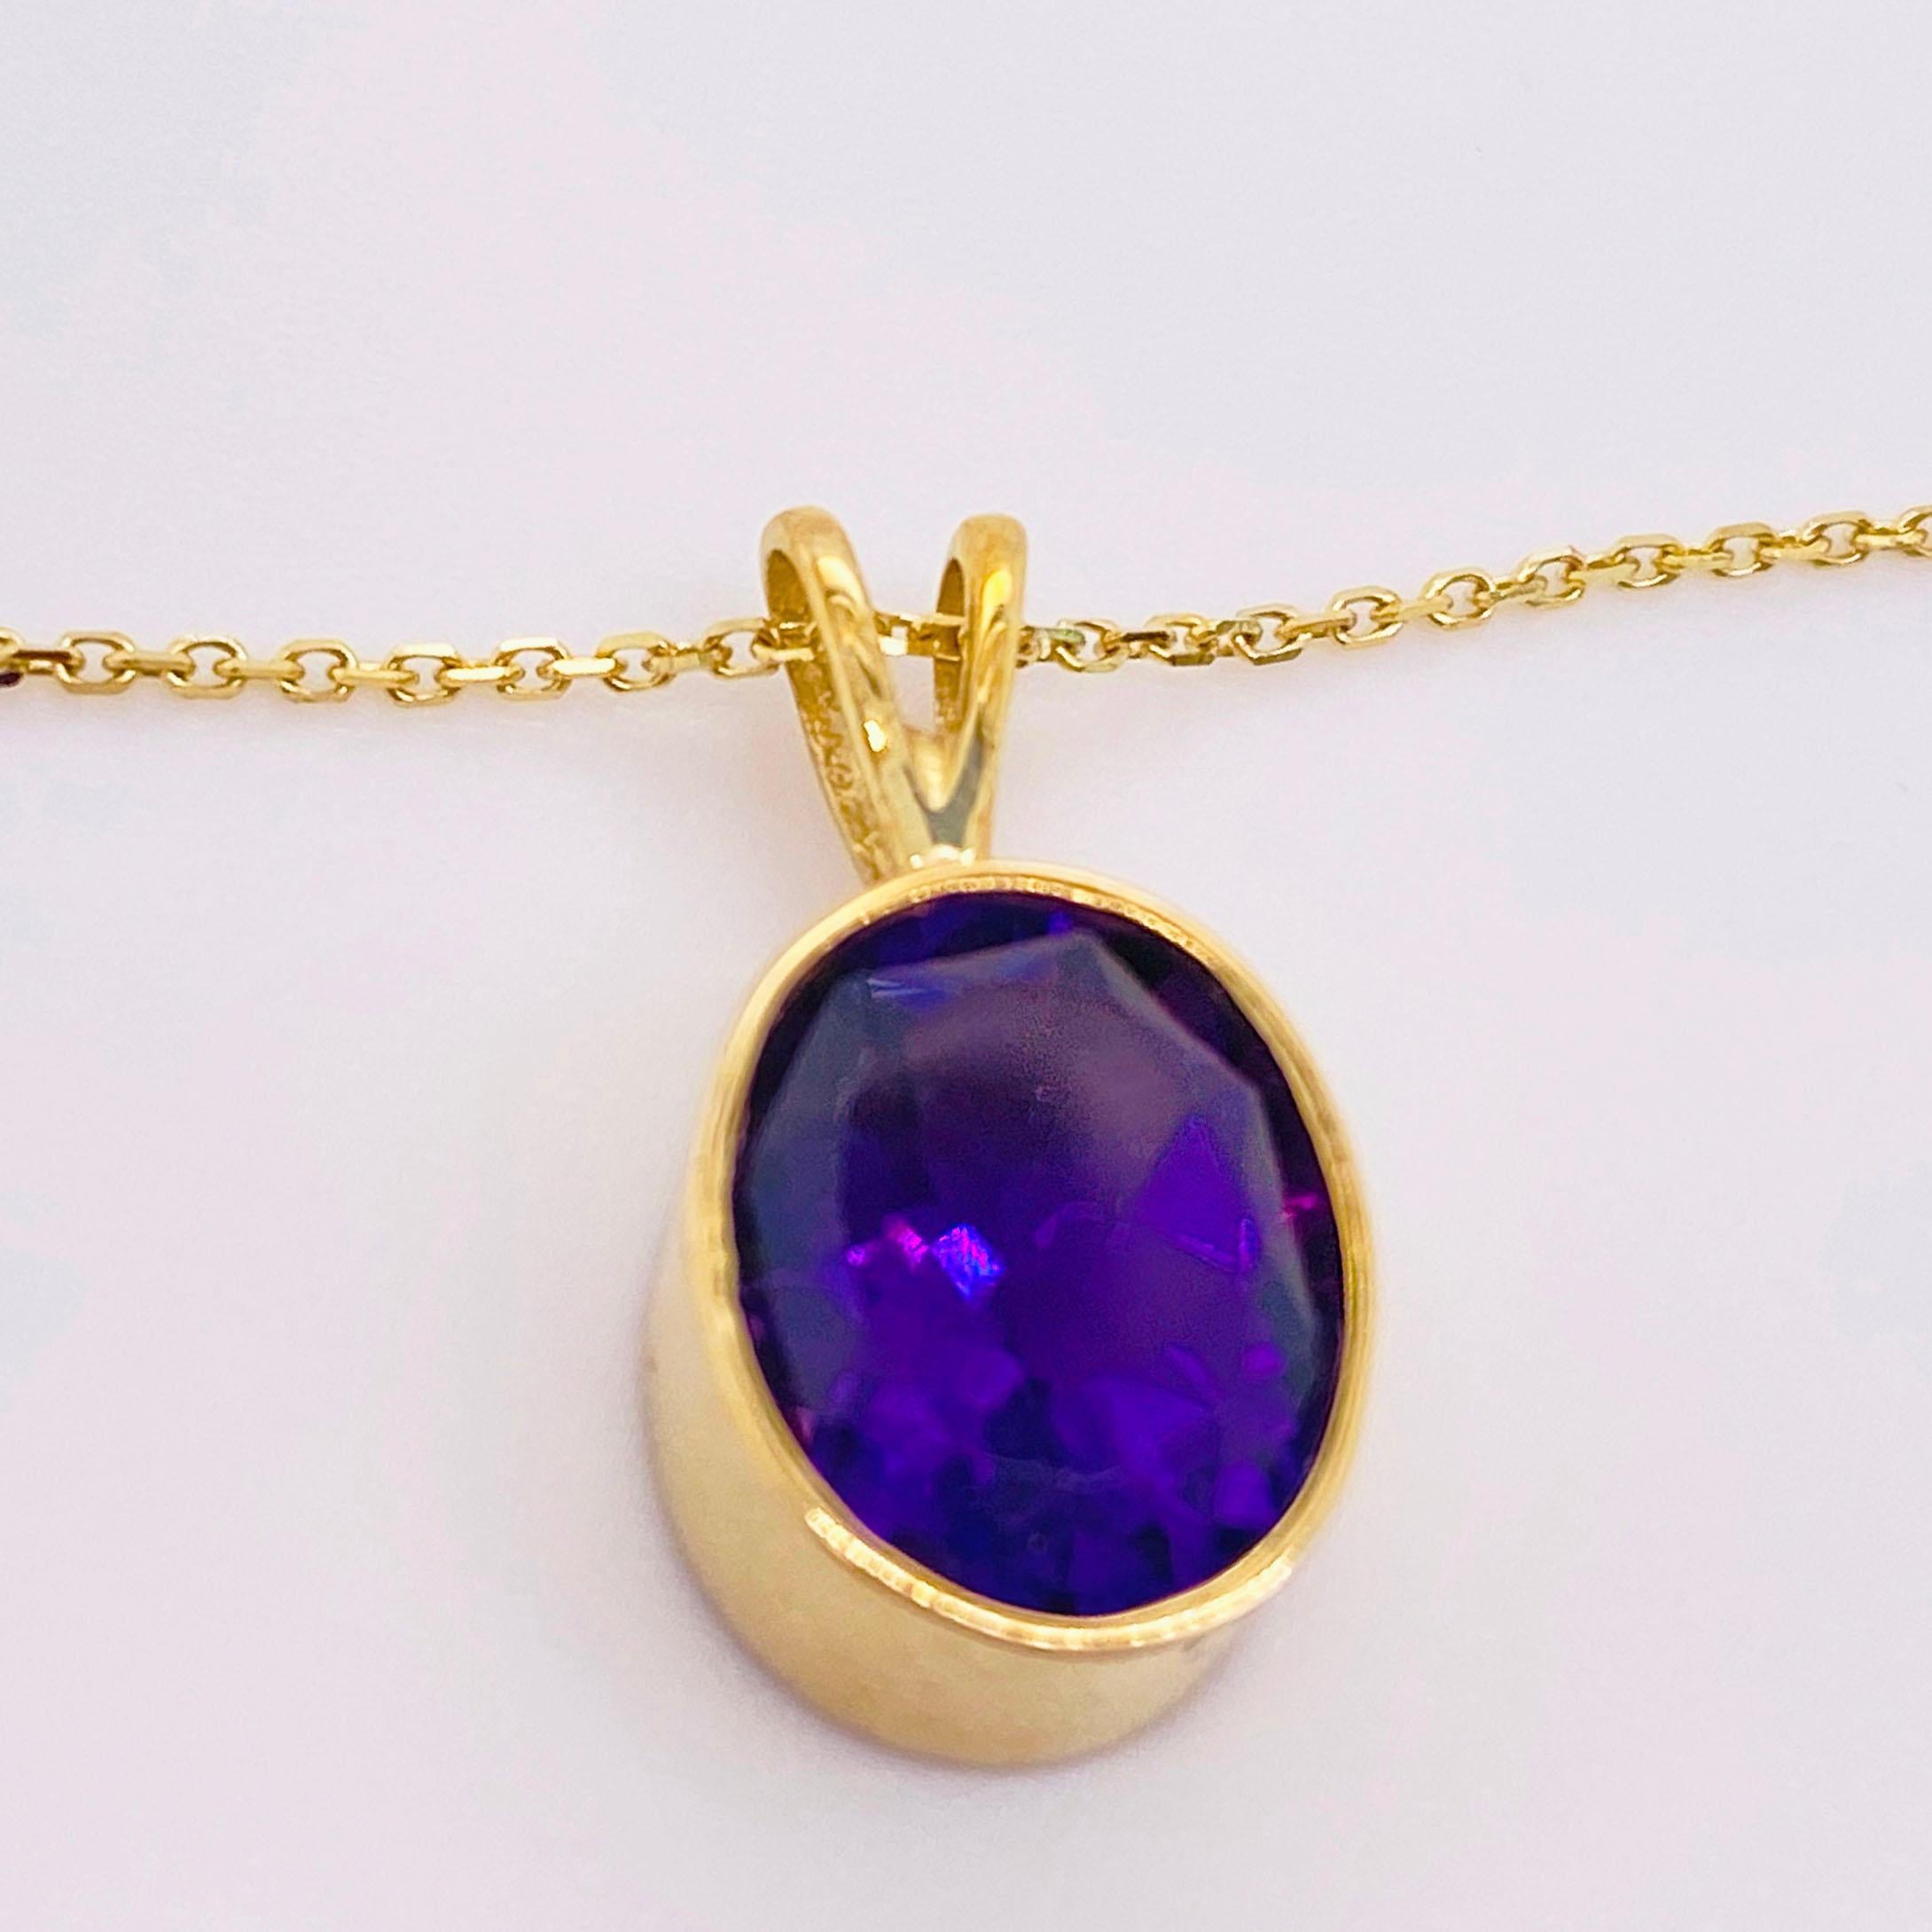 14 Karat Amethyst Necklace-Large 2.00 carat 
On cable Chain with lobster clasp 
Adjustable Lengths that can either be 18 or 16 inches long 
Pendant is 10 mm by 9 mm oval with handmade bezel
